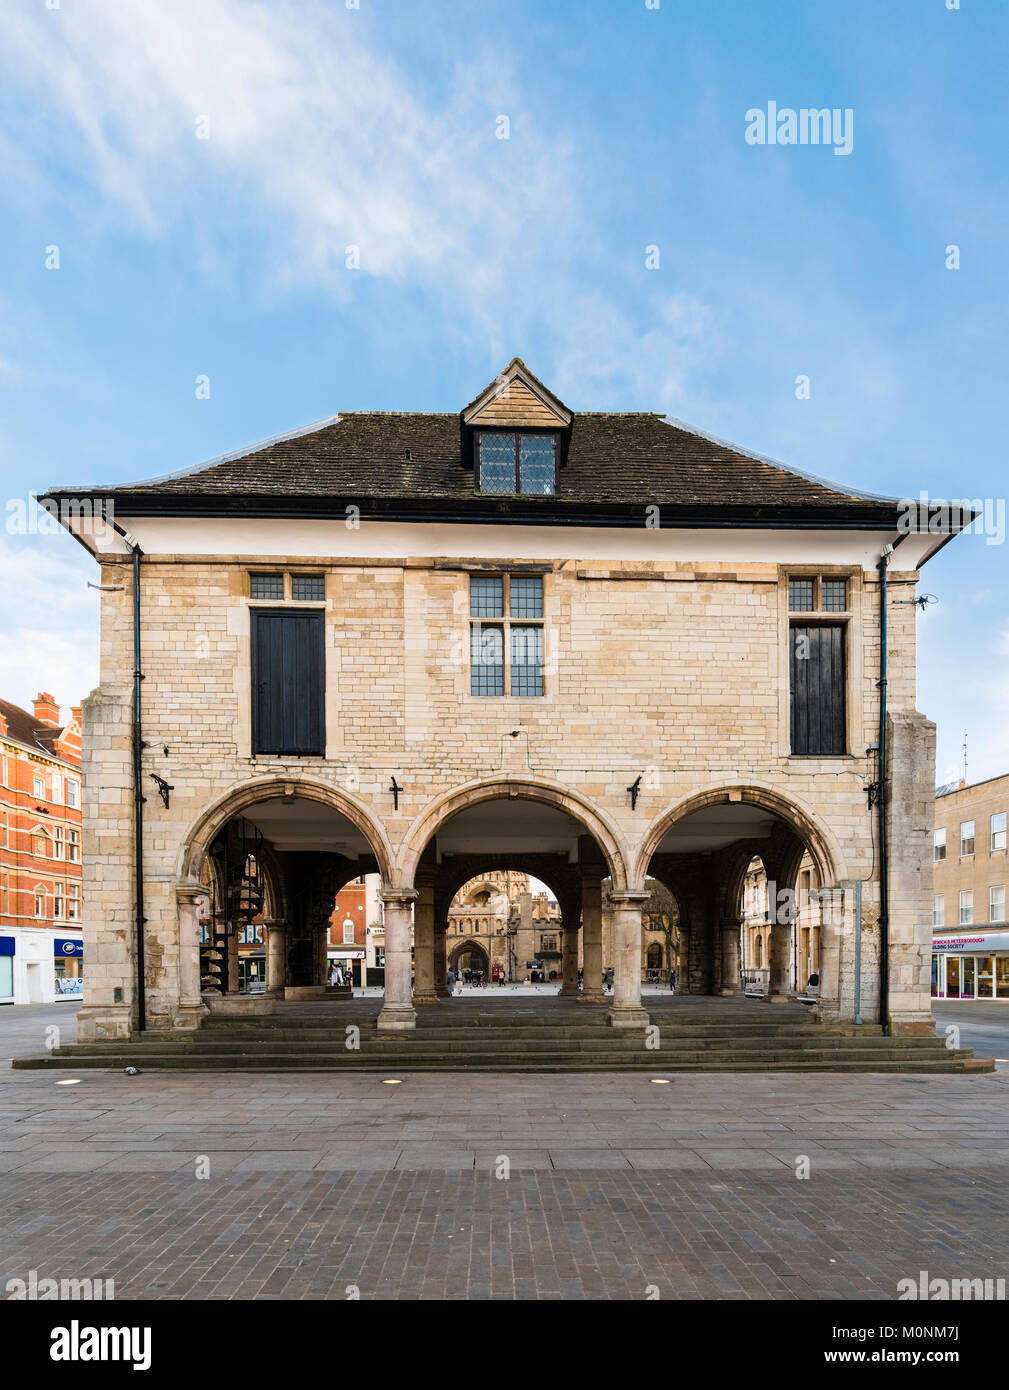 The Peterborough Guildhall, also called the Old Guild Hall, is a Grade II listed building in Market Square, Peterborough, Cambridgshire Stock Photo